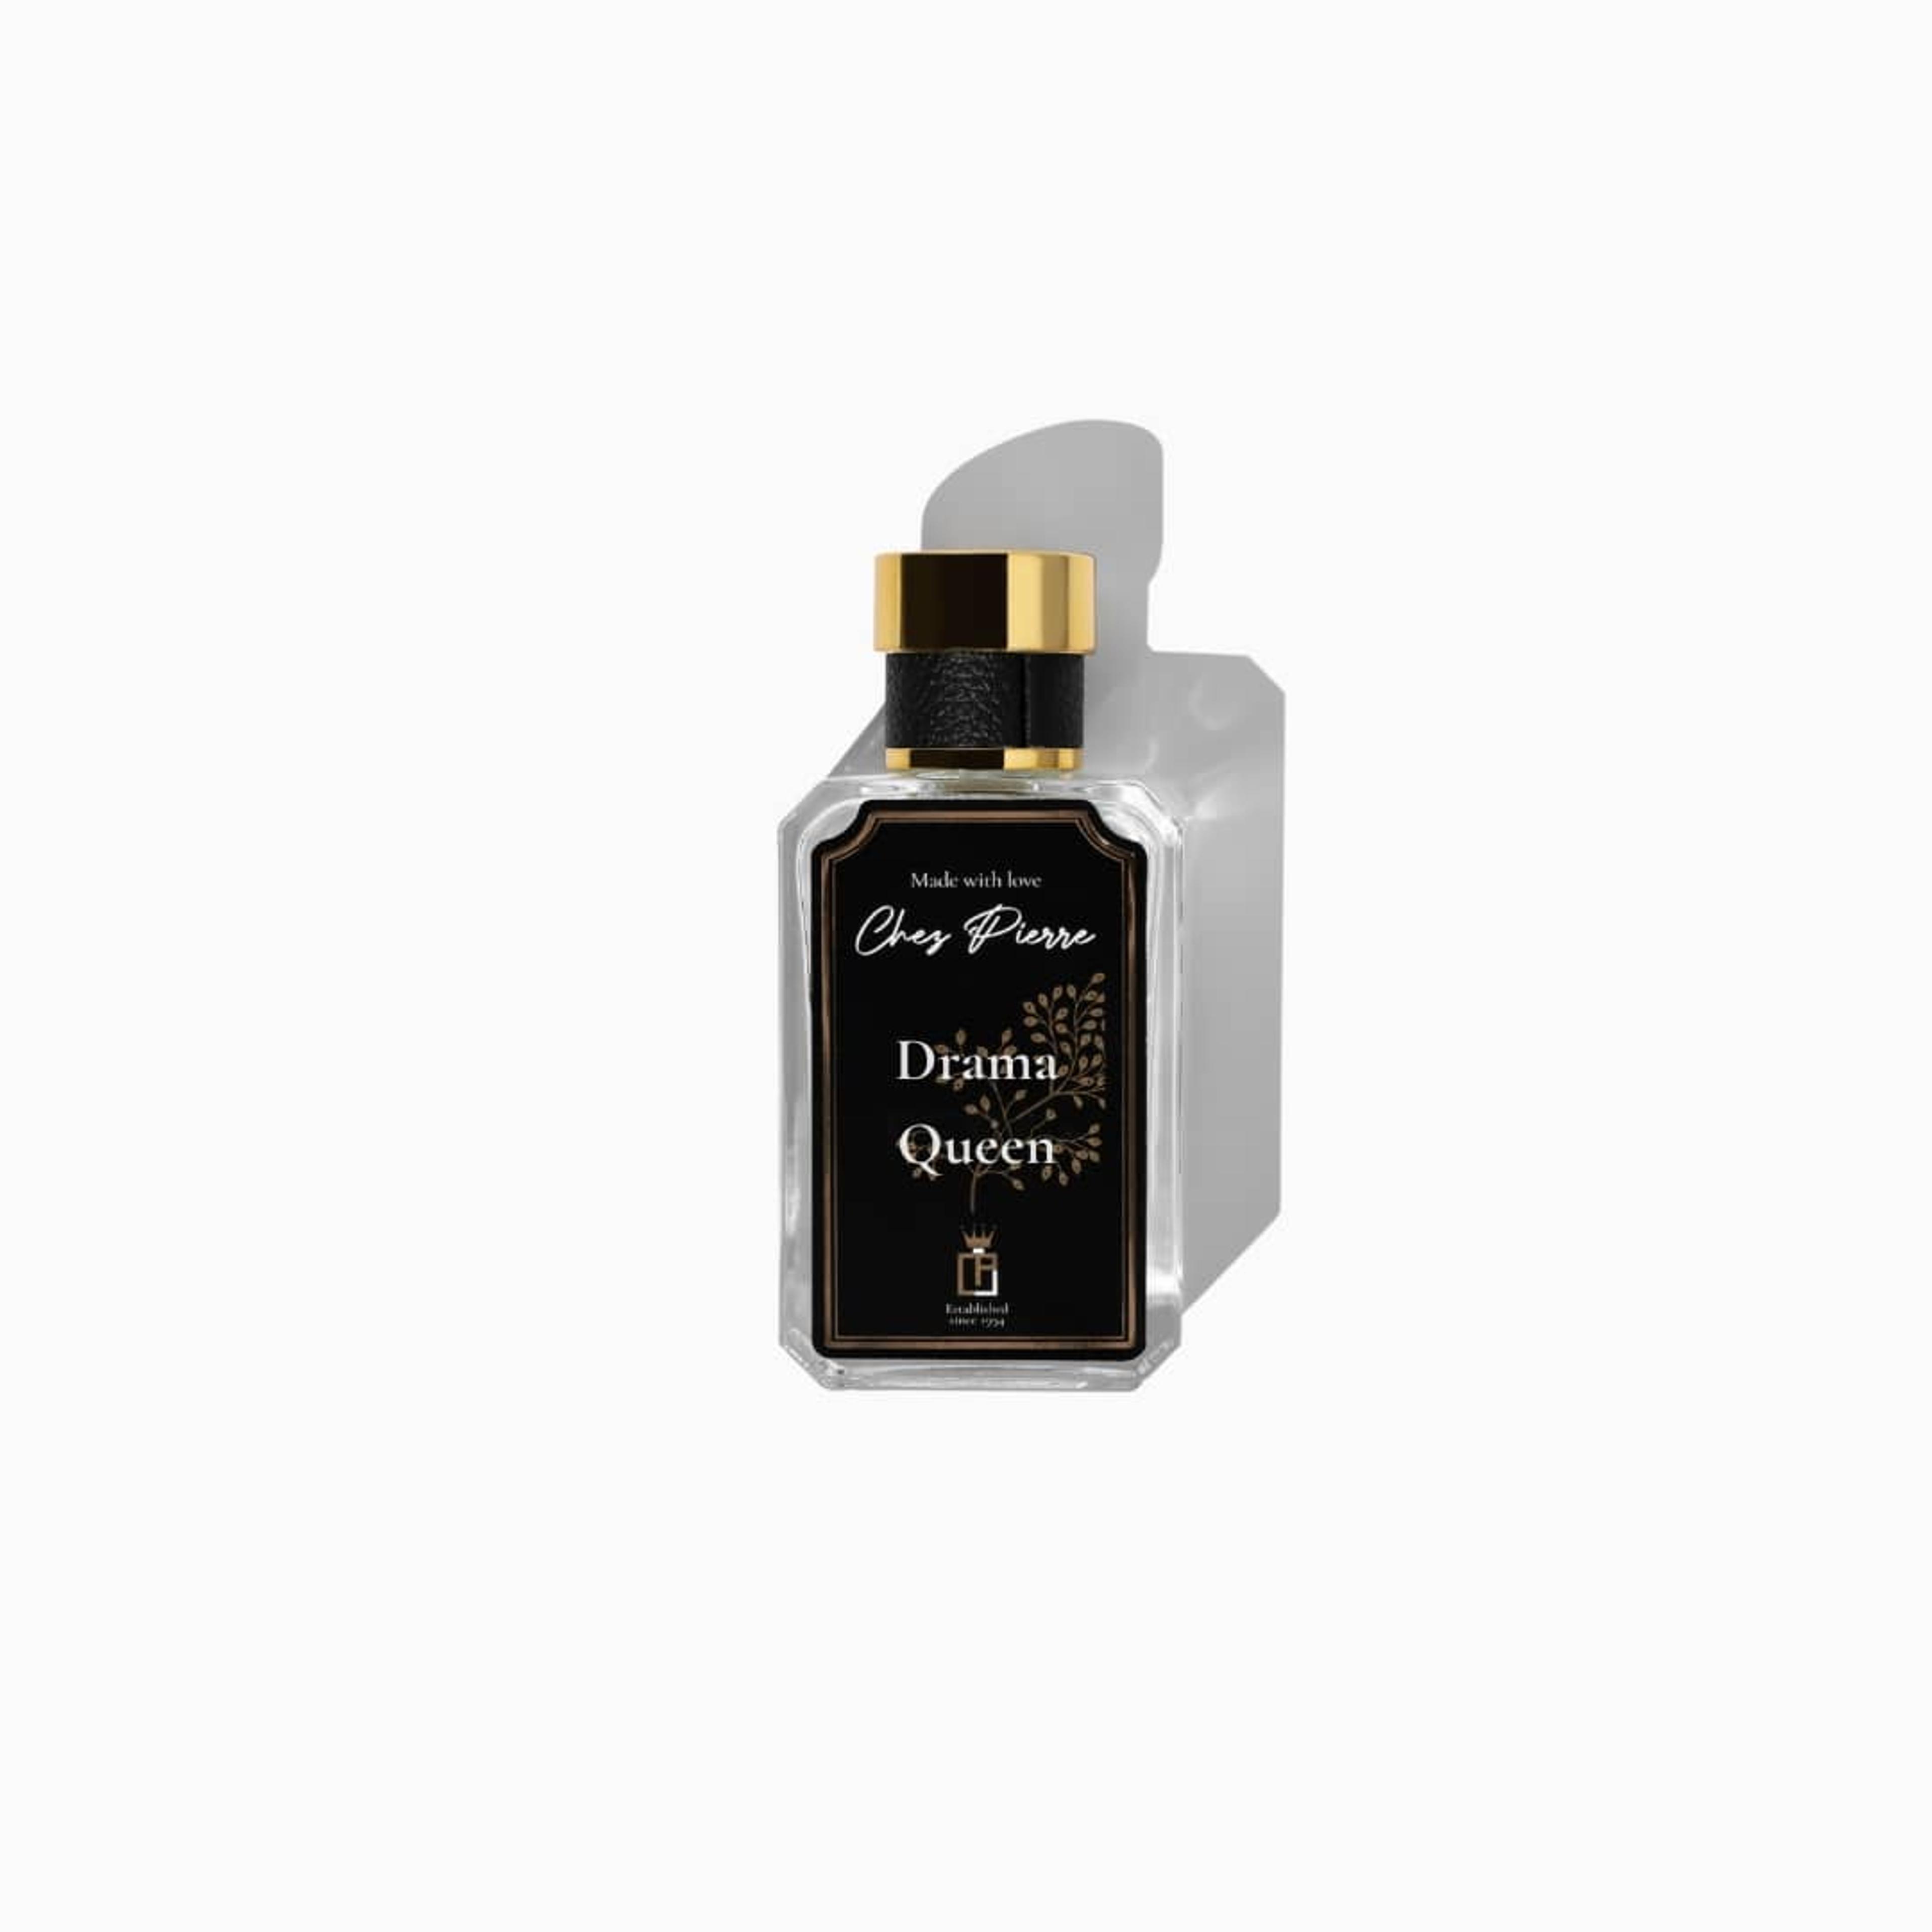 Chez Pierre's Drama Queen Perfume Inspired By Scandal